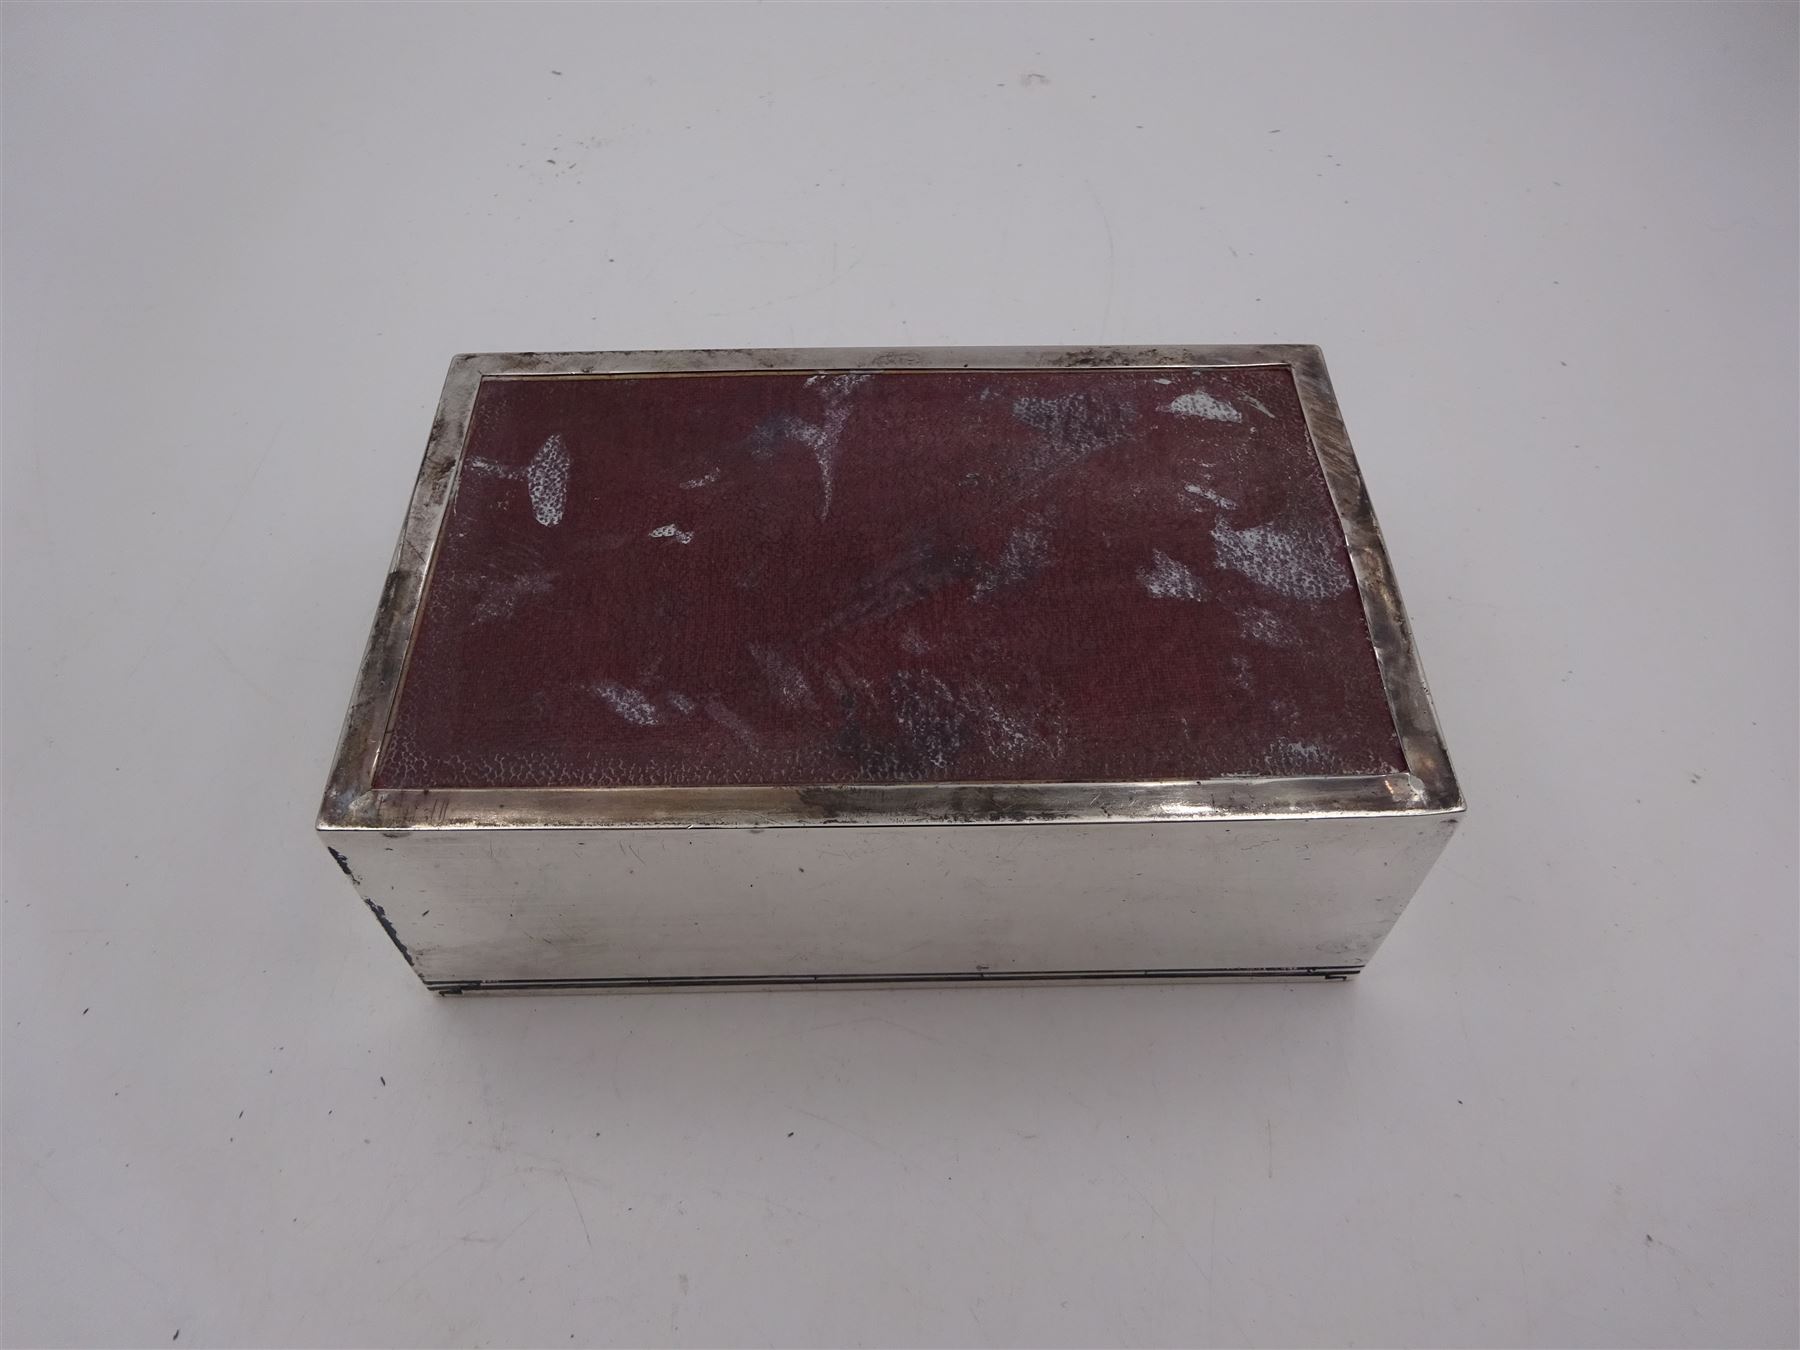 1930s silver mounted cigarette box - Image 30 of 44